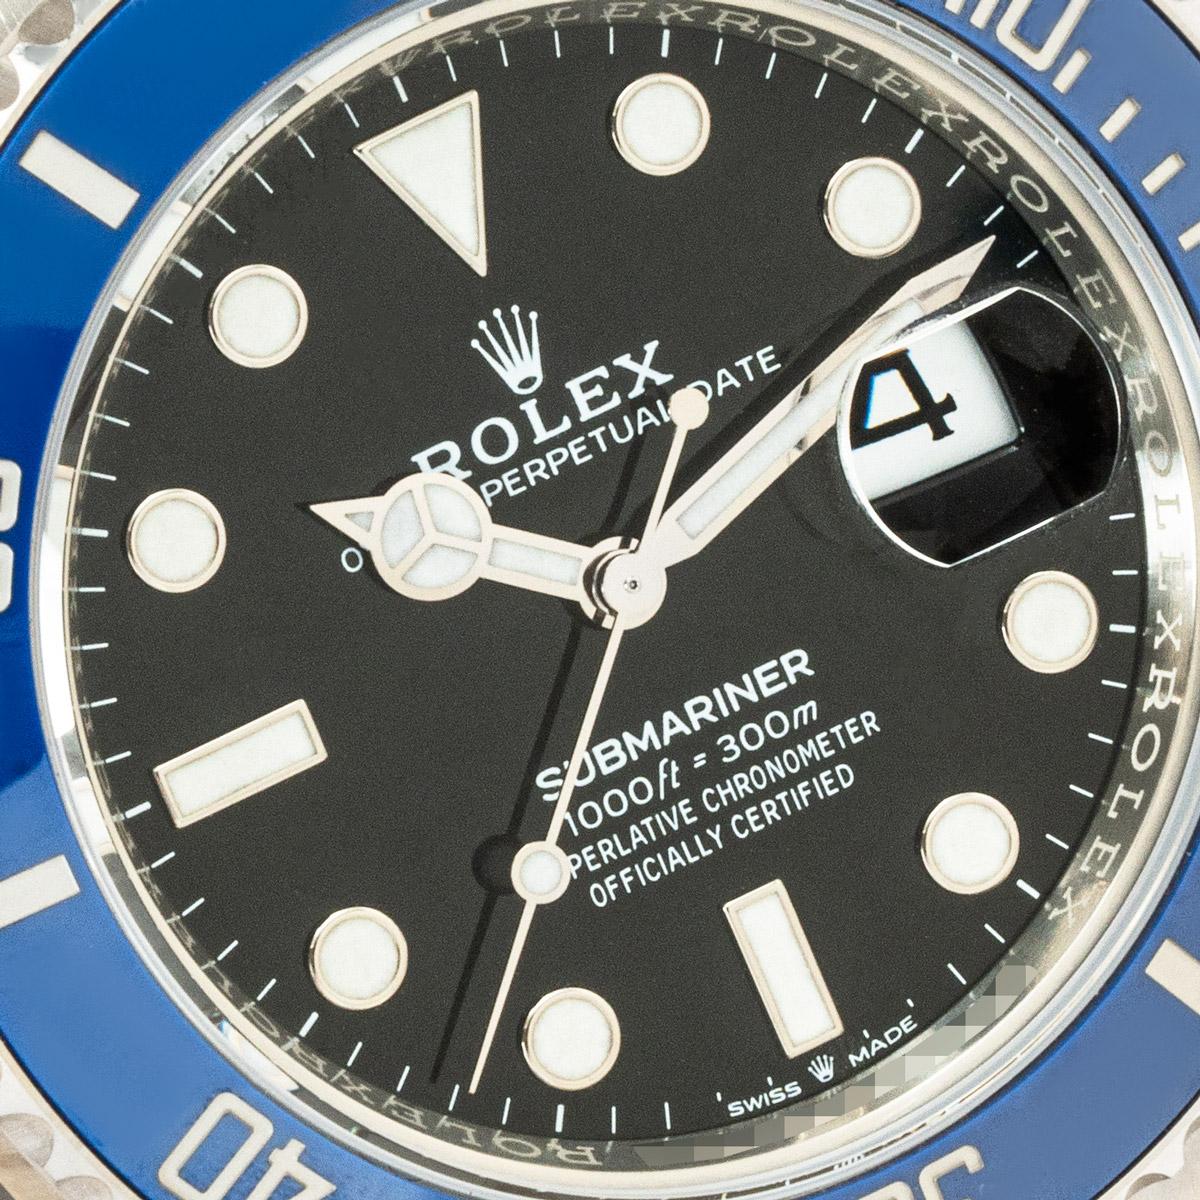 Rolex Submariner Date White Gold 126619LB In New Condition For Sale In London, GB